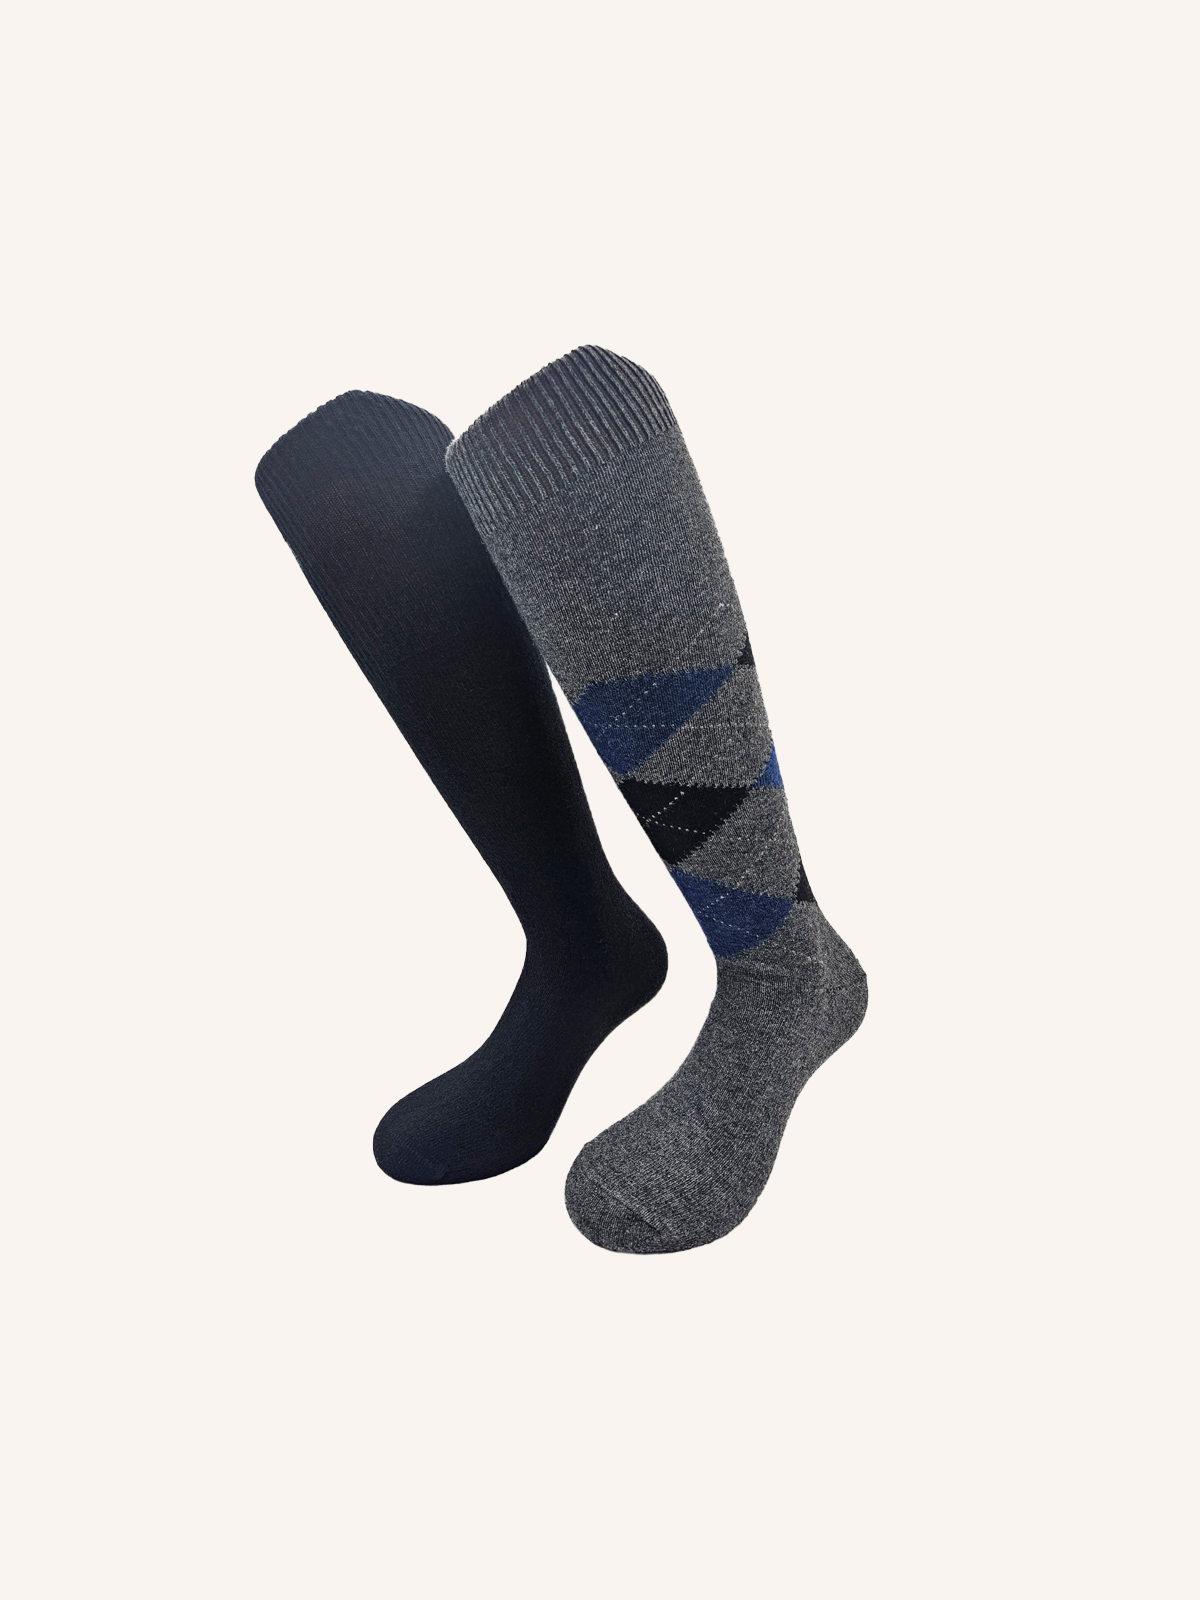 Long Sock in Cashmere Wool for Men | Fantasy | Pack of 2 pairs | Daiquiri L